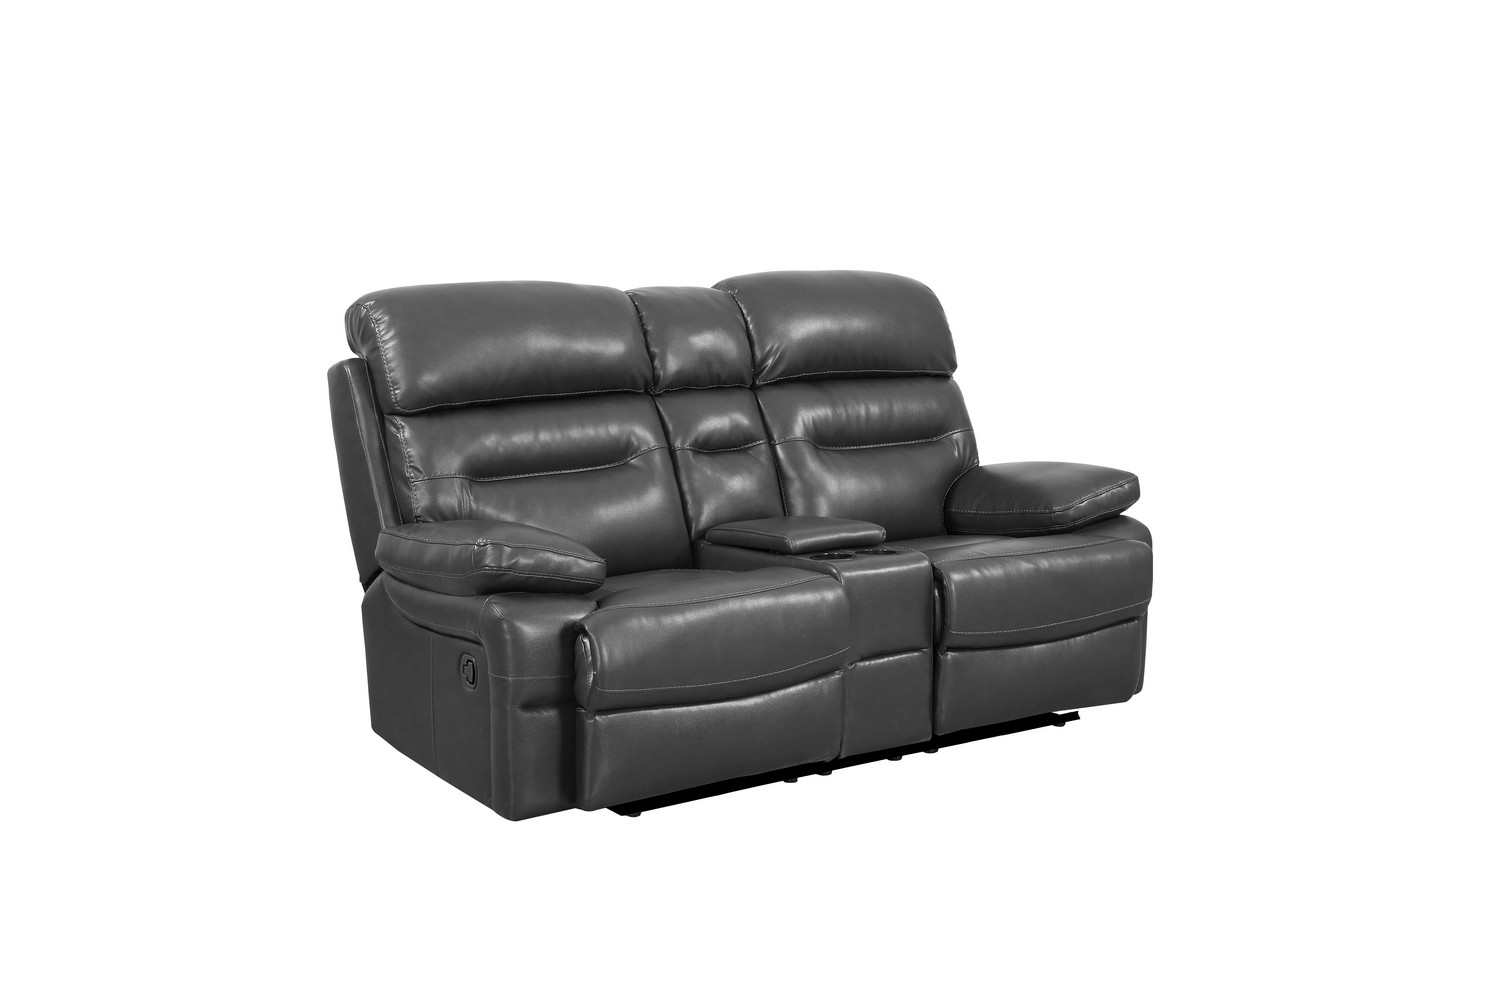 78" Gray Faux Leather Manual Reclining Love Seat With Storage-366327-1